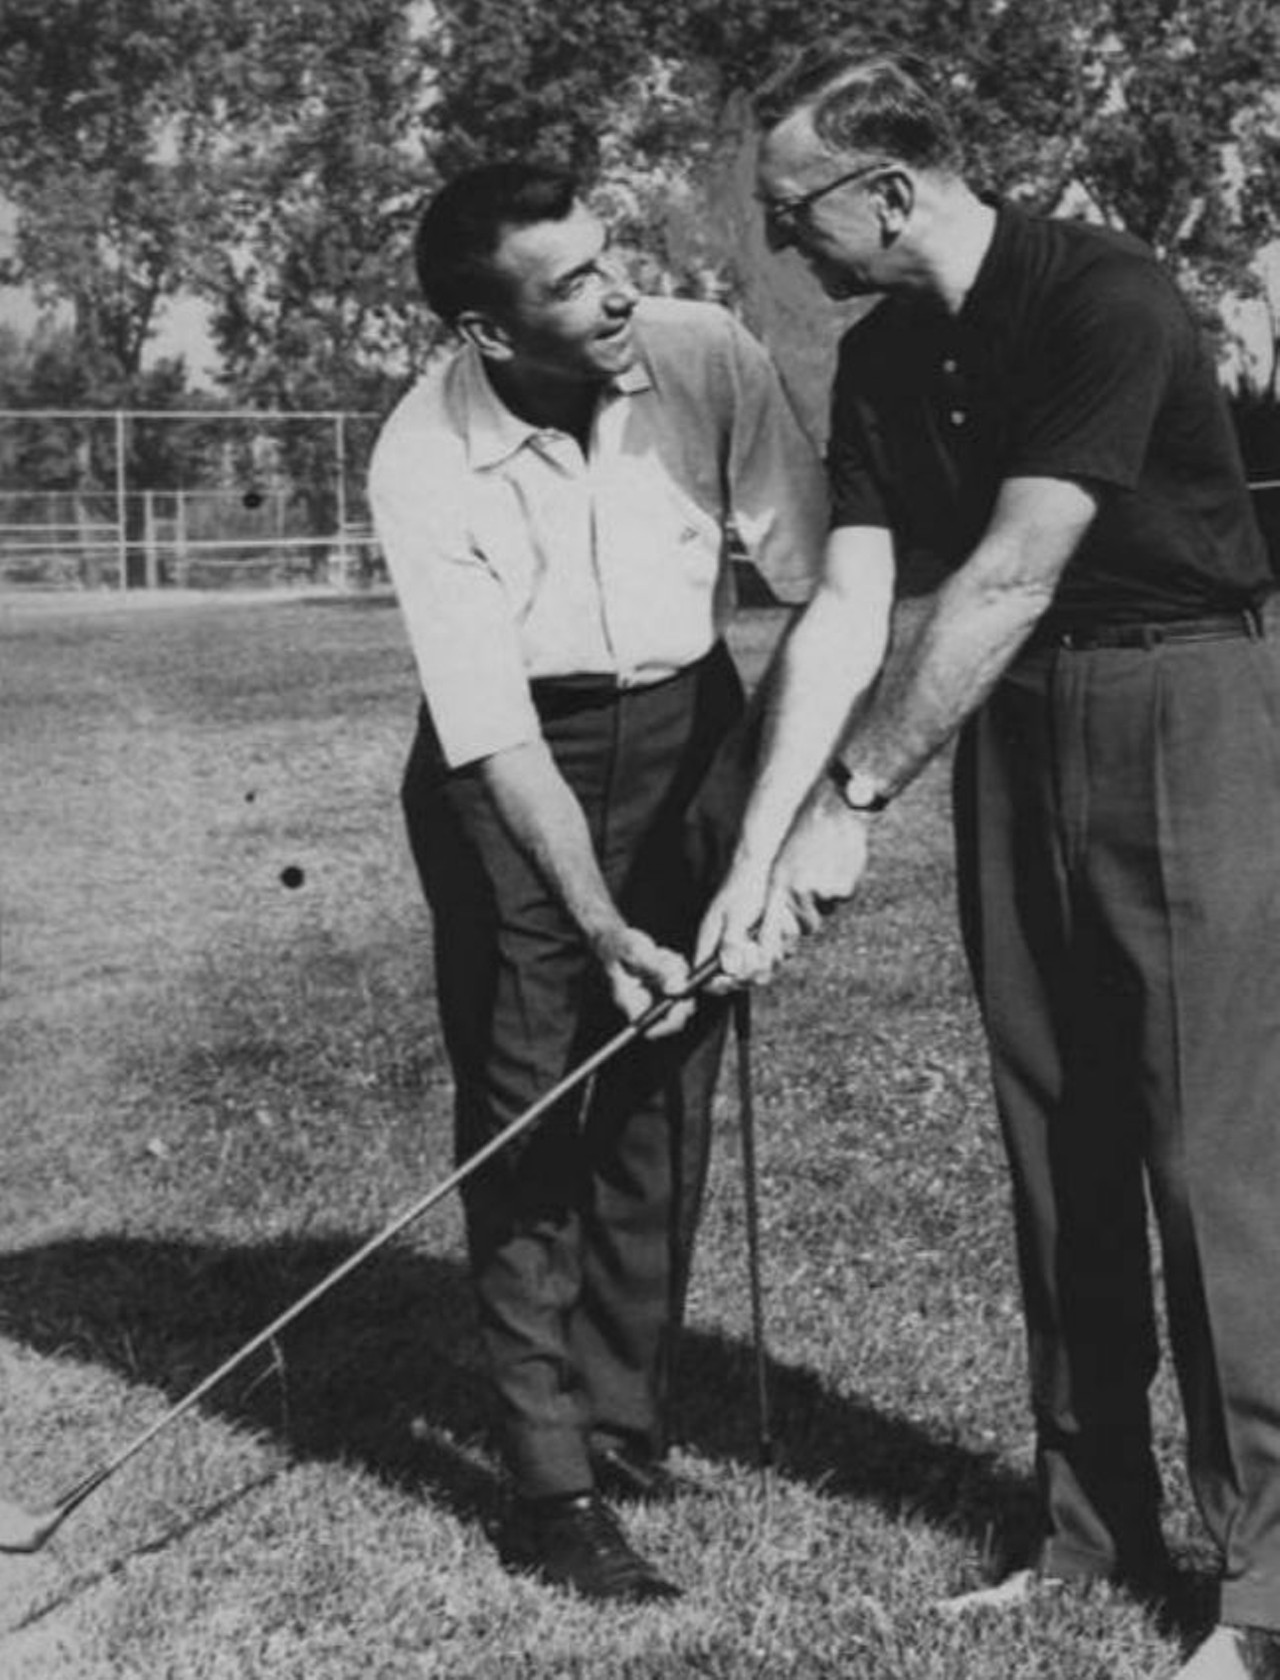 "Orange Village, Ohio: Cleveland Mayor Ralph Locher [right] gets a tip from Ed Furgol, one of the pros participating in the Cleveland Open Pro-Am tournament here today."  --photo caption, 1963.  The tournament was won by the team of amateur Mason Rudolph and pro golfer Jack Nicklaus.